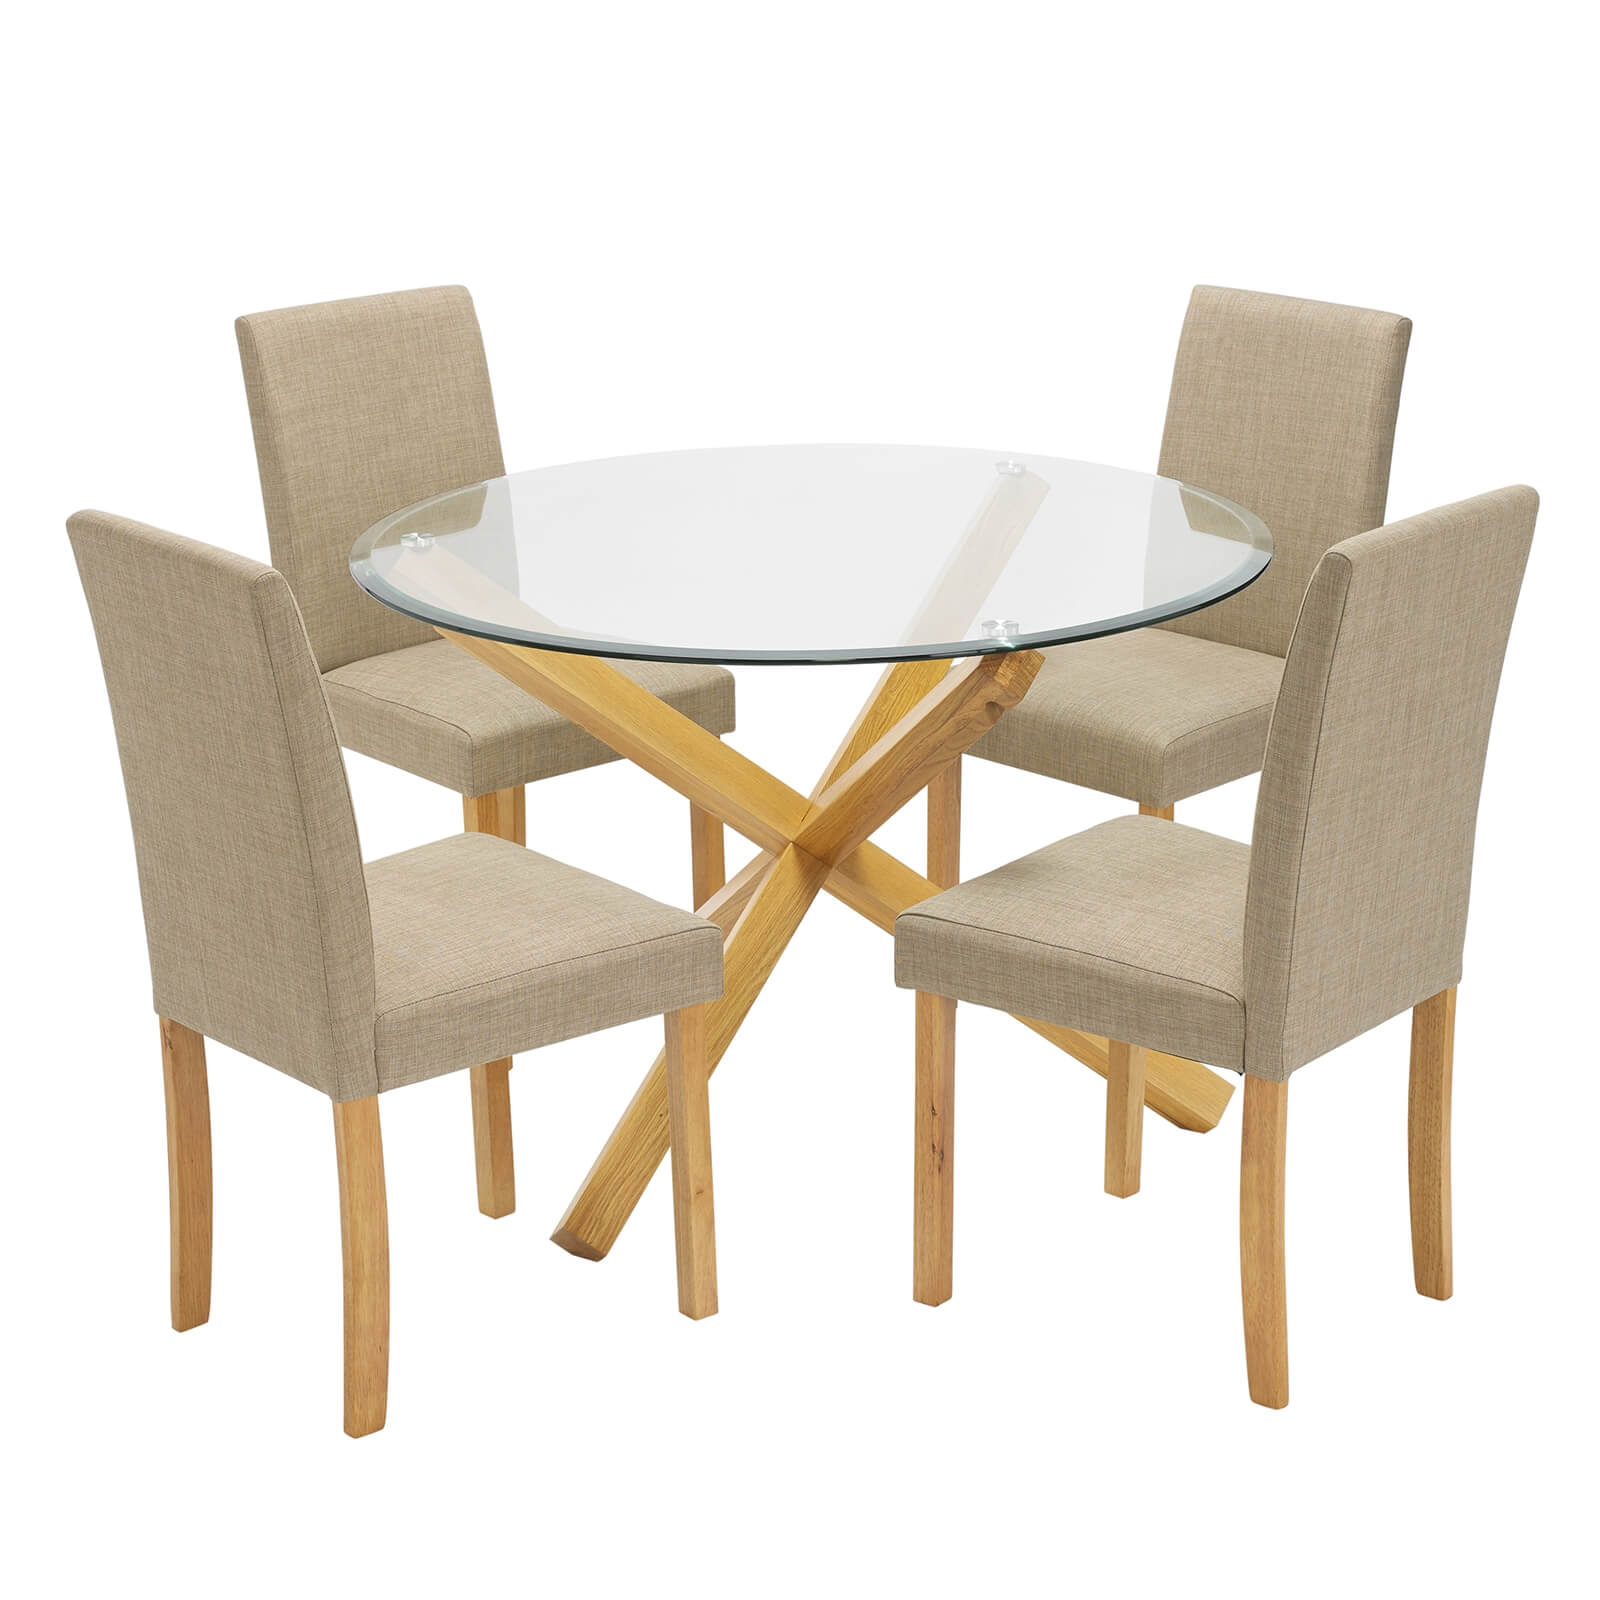 Oporto 4 Seater Dining Set - Anna Dining Chairs - Beige